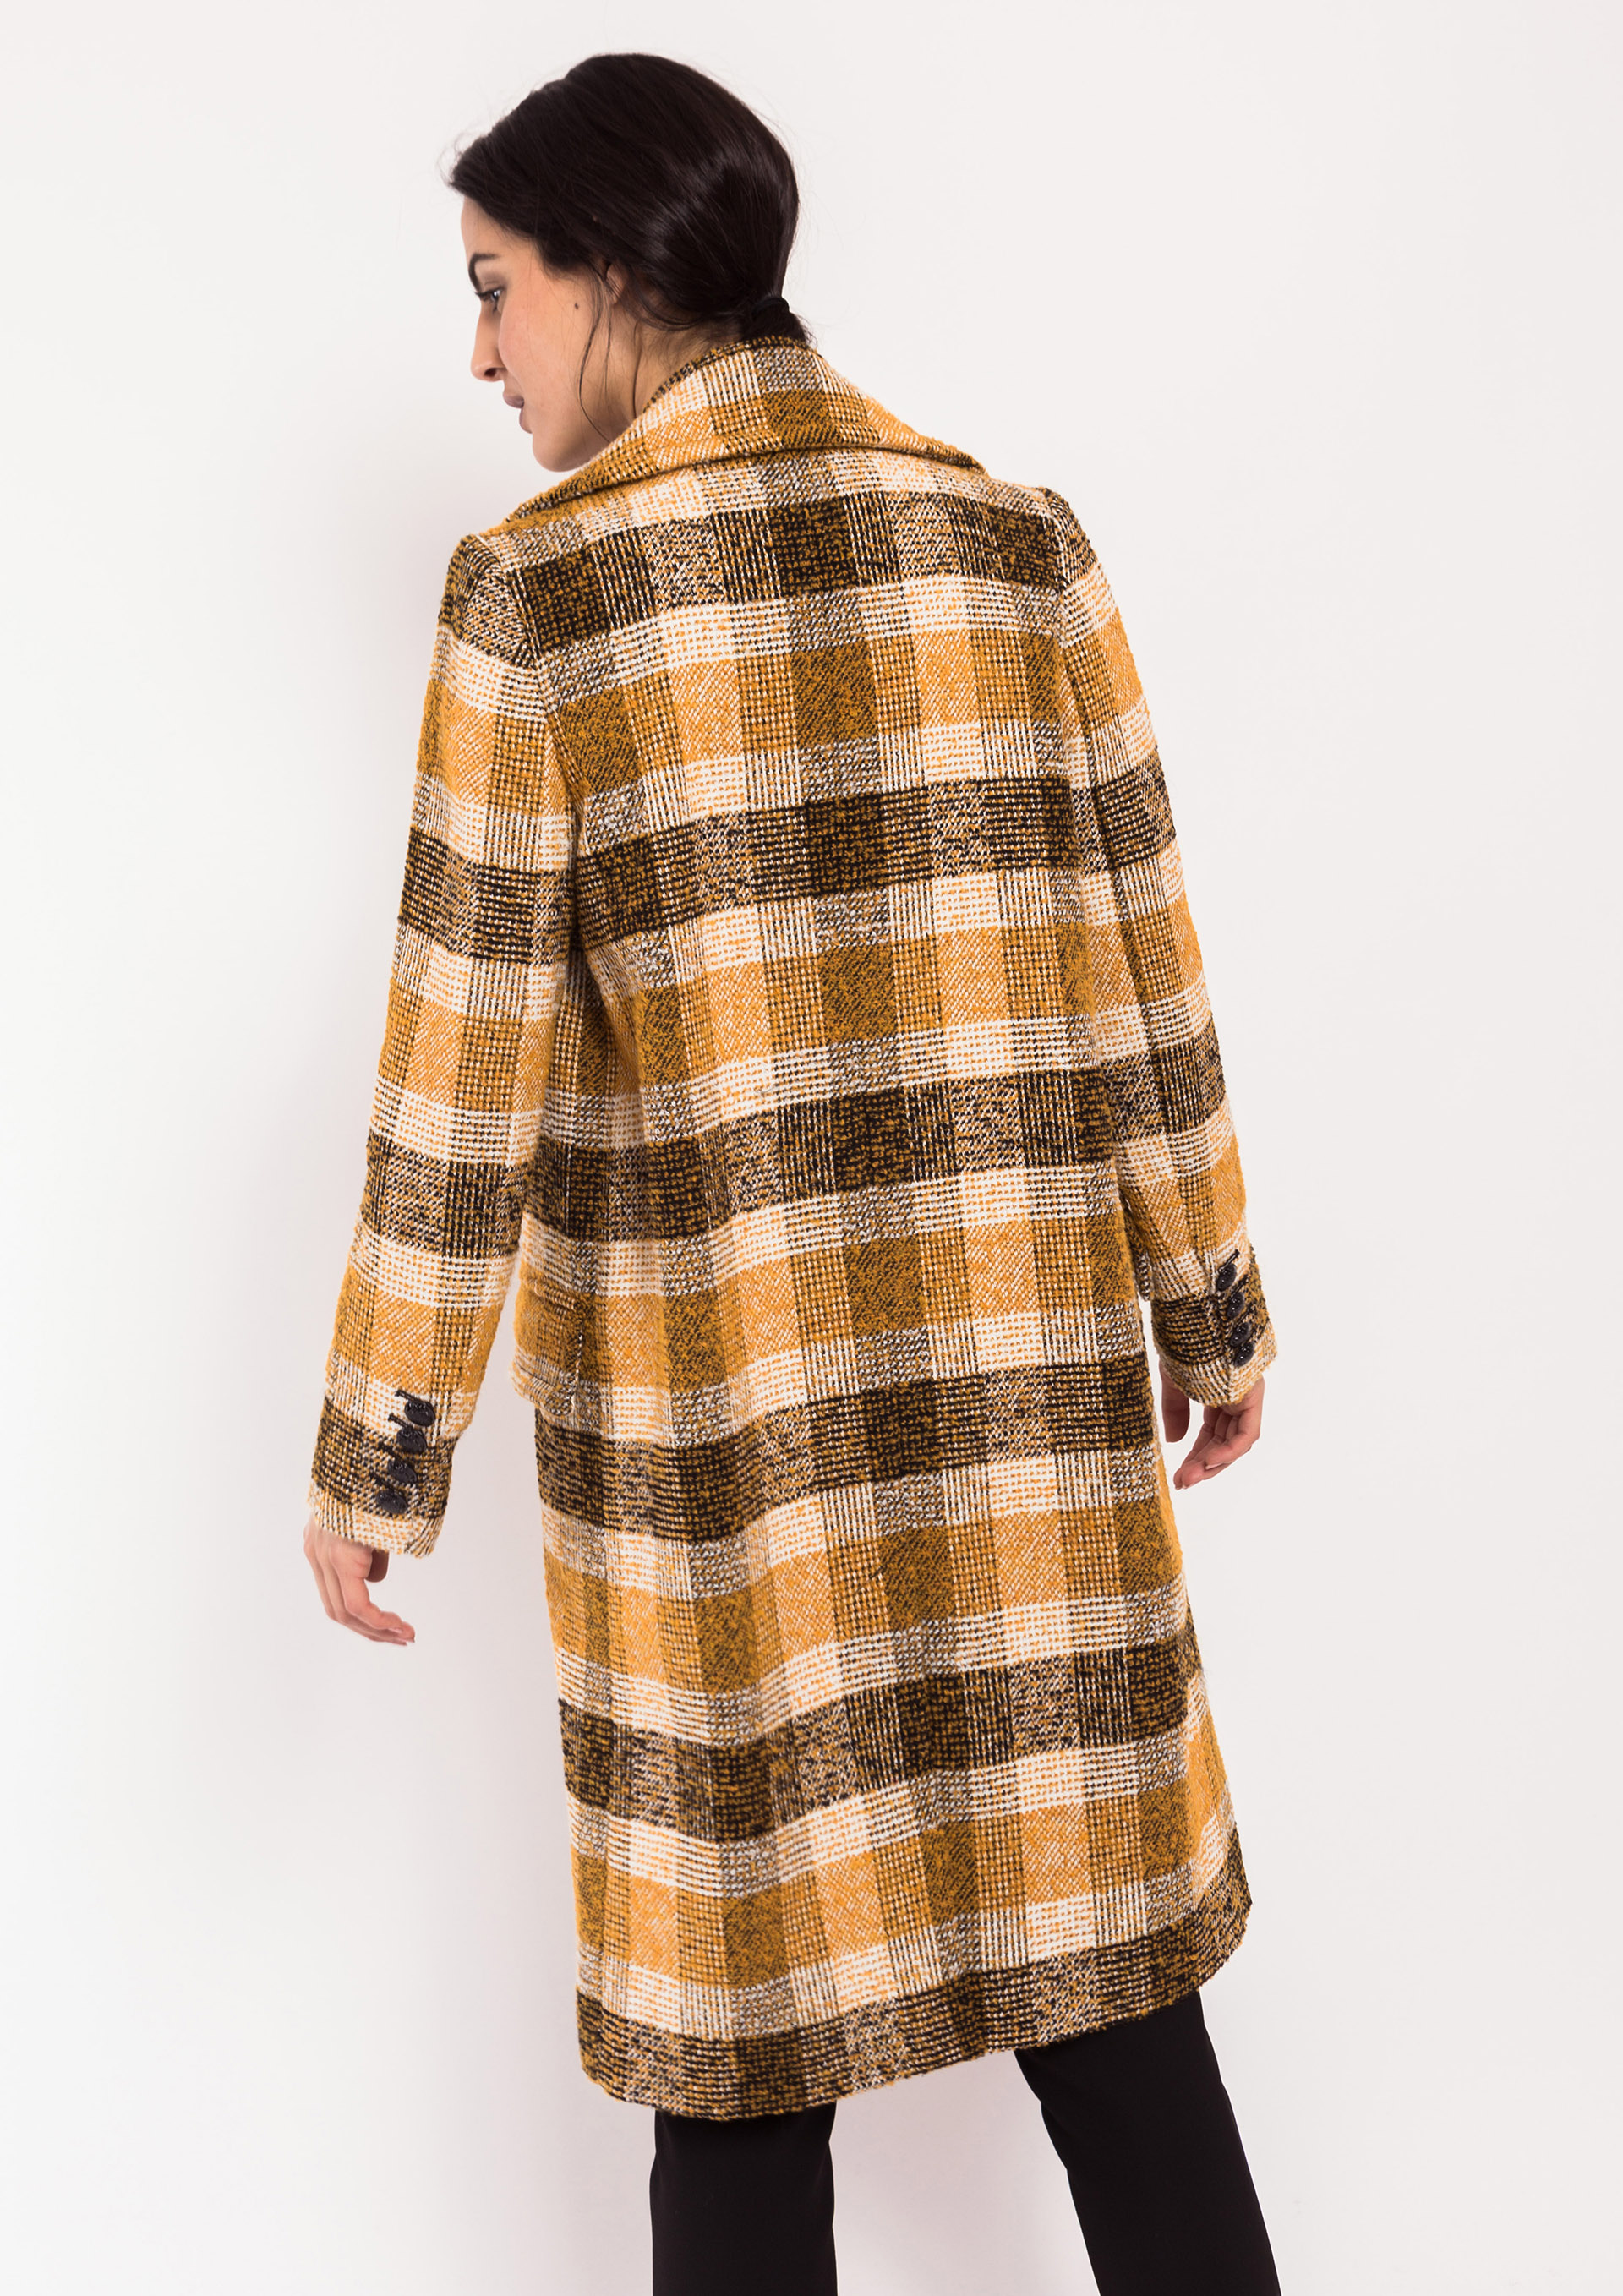 Prince of Wales check coat in ochre